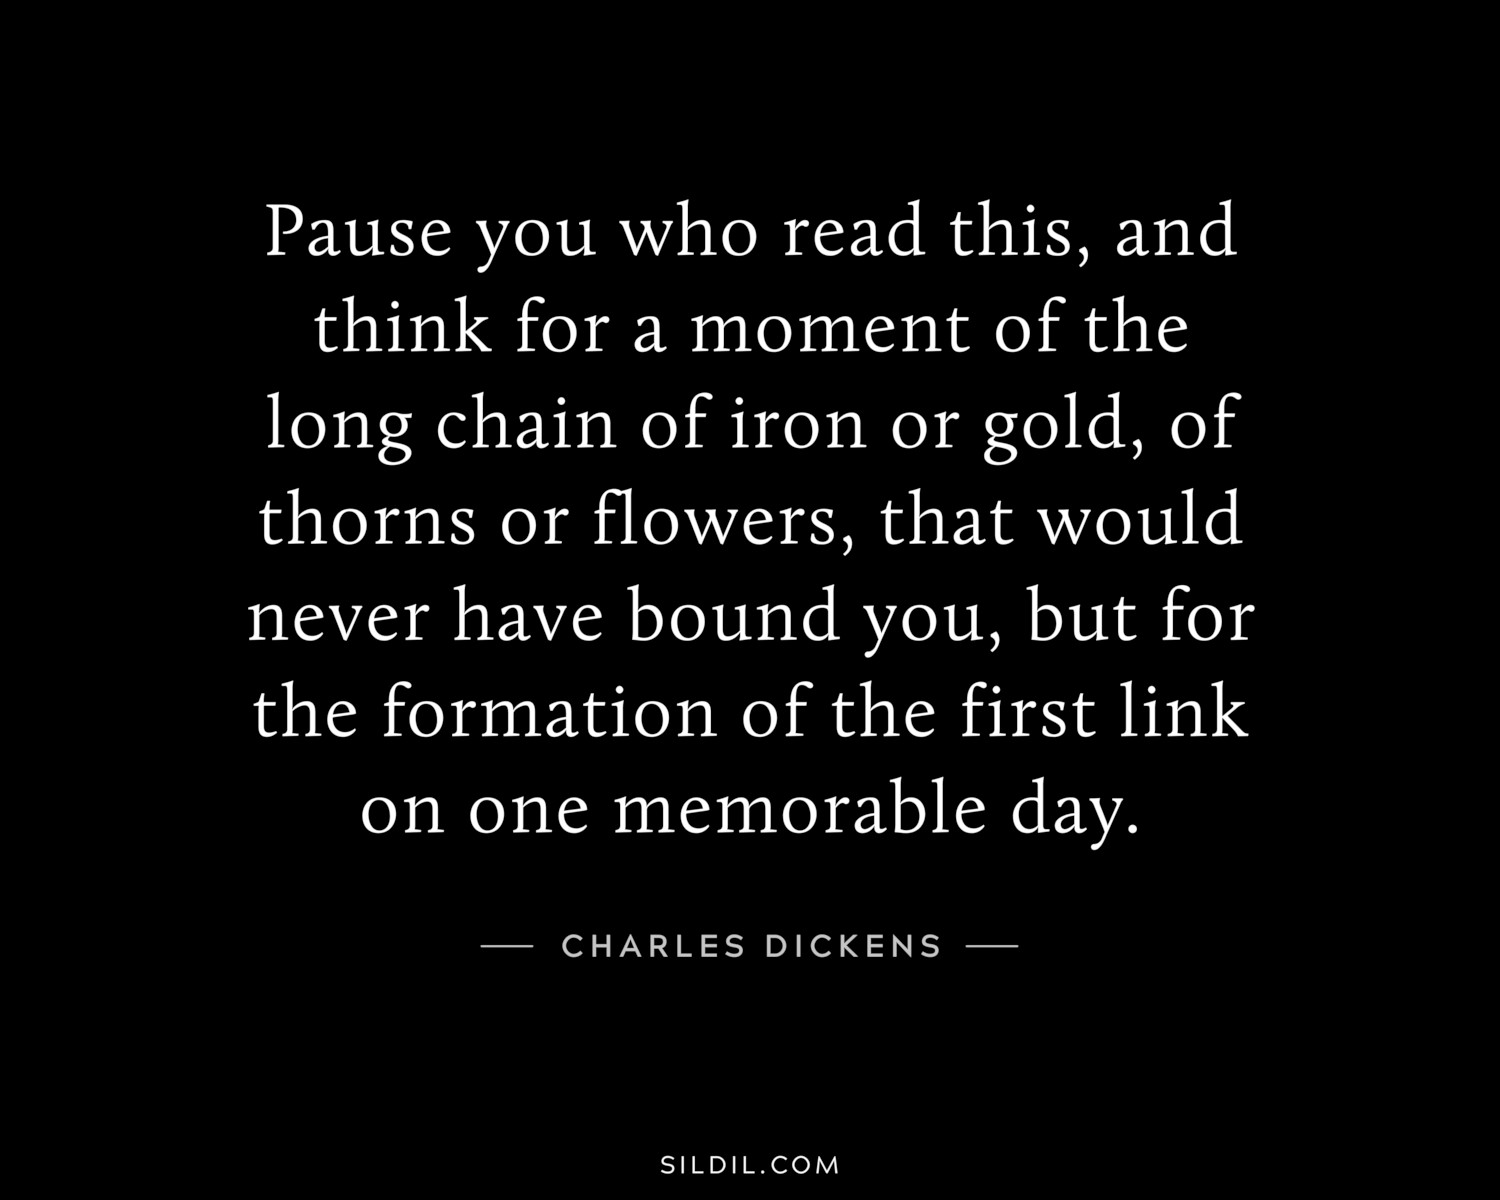 Pause you who read this, and think for a moment of the long chain of iron or gold, of thorns or flowers, that would never have bound you, but for the formation of the first link on one memorable day.